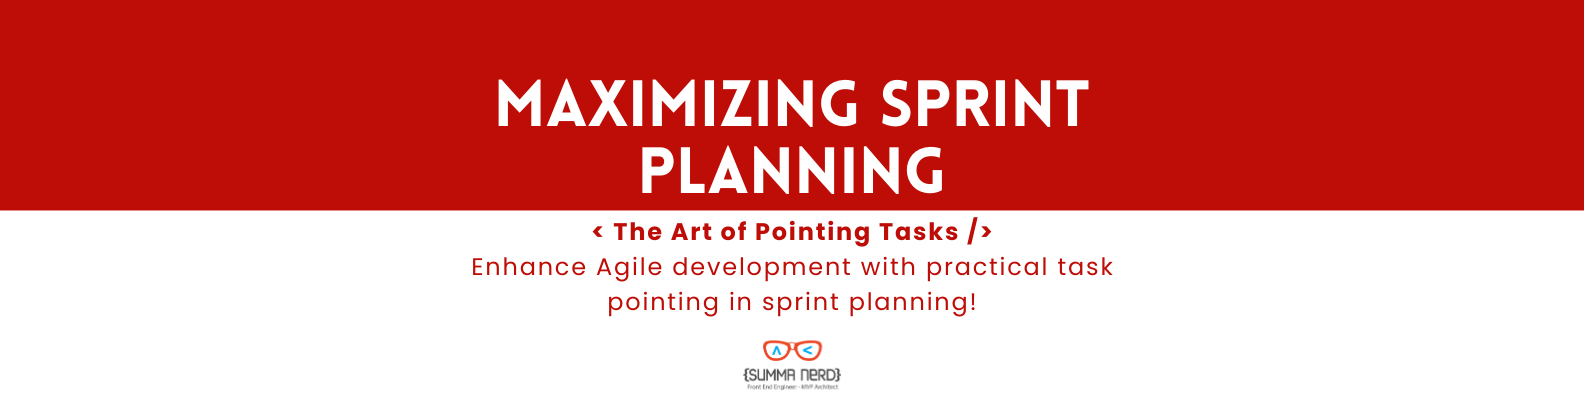 Maximizing Sprint Planning: The are of pointing tasks